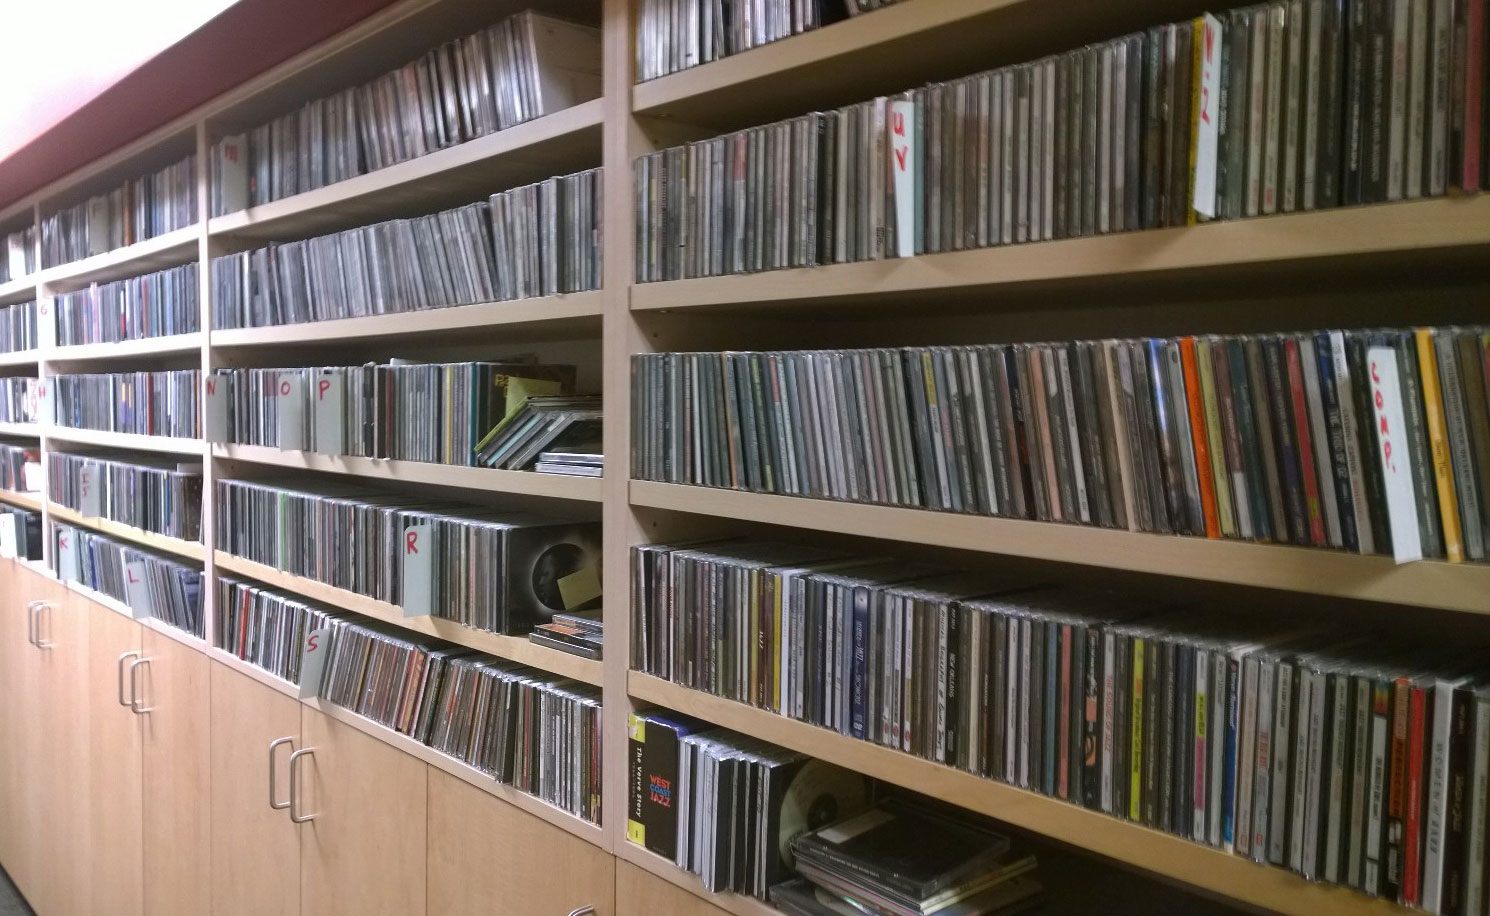 A partial view of KNKX's CD collection. Photo: Morf Morford